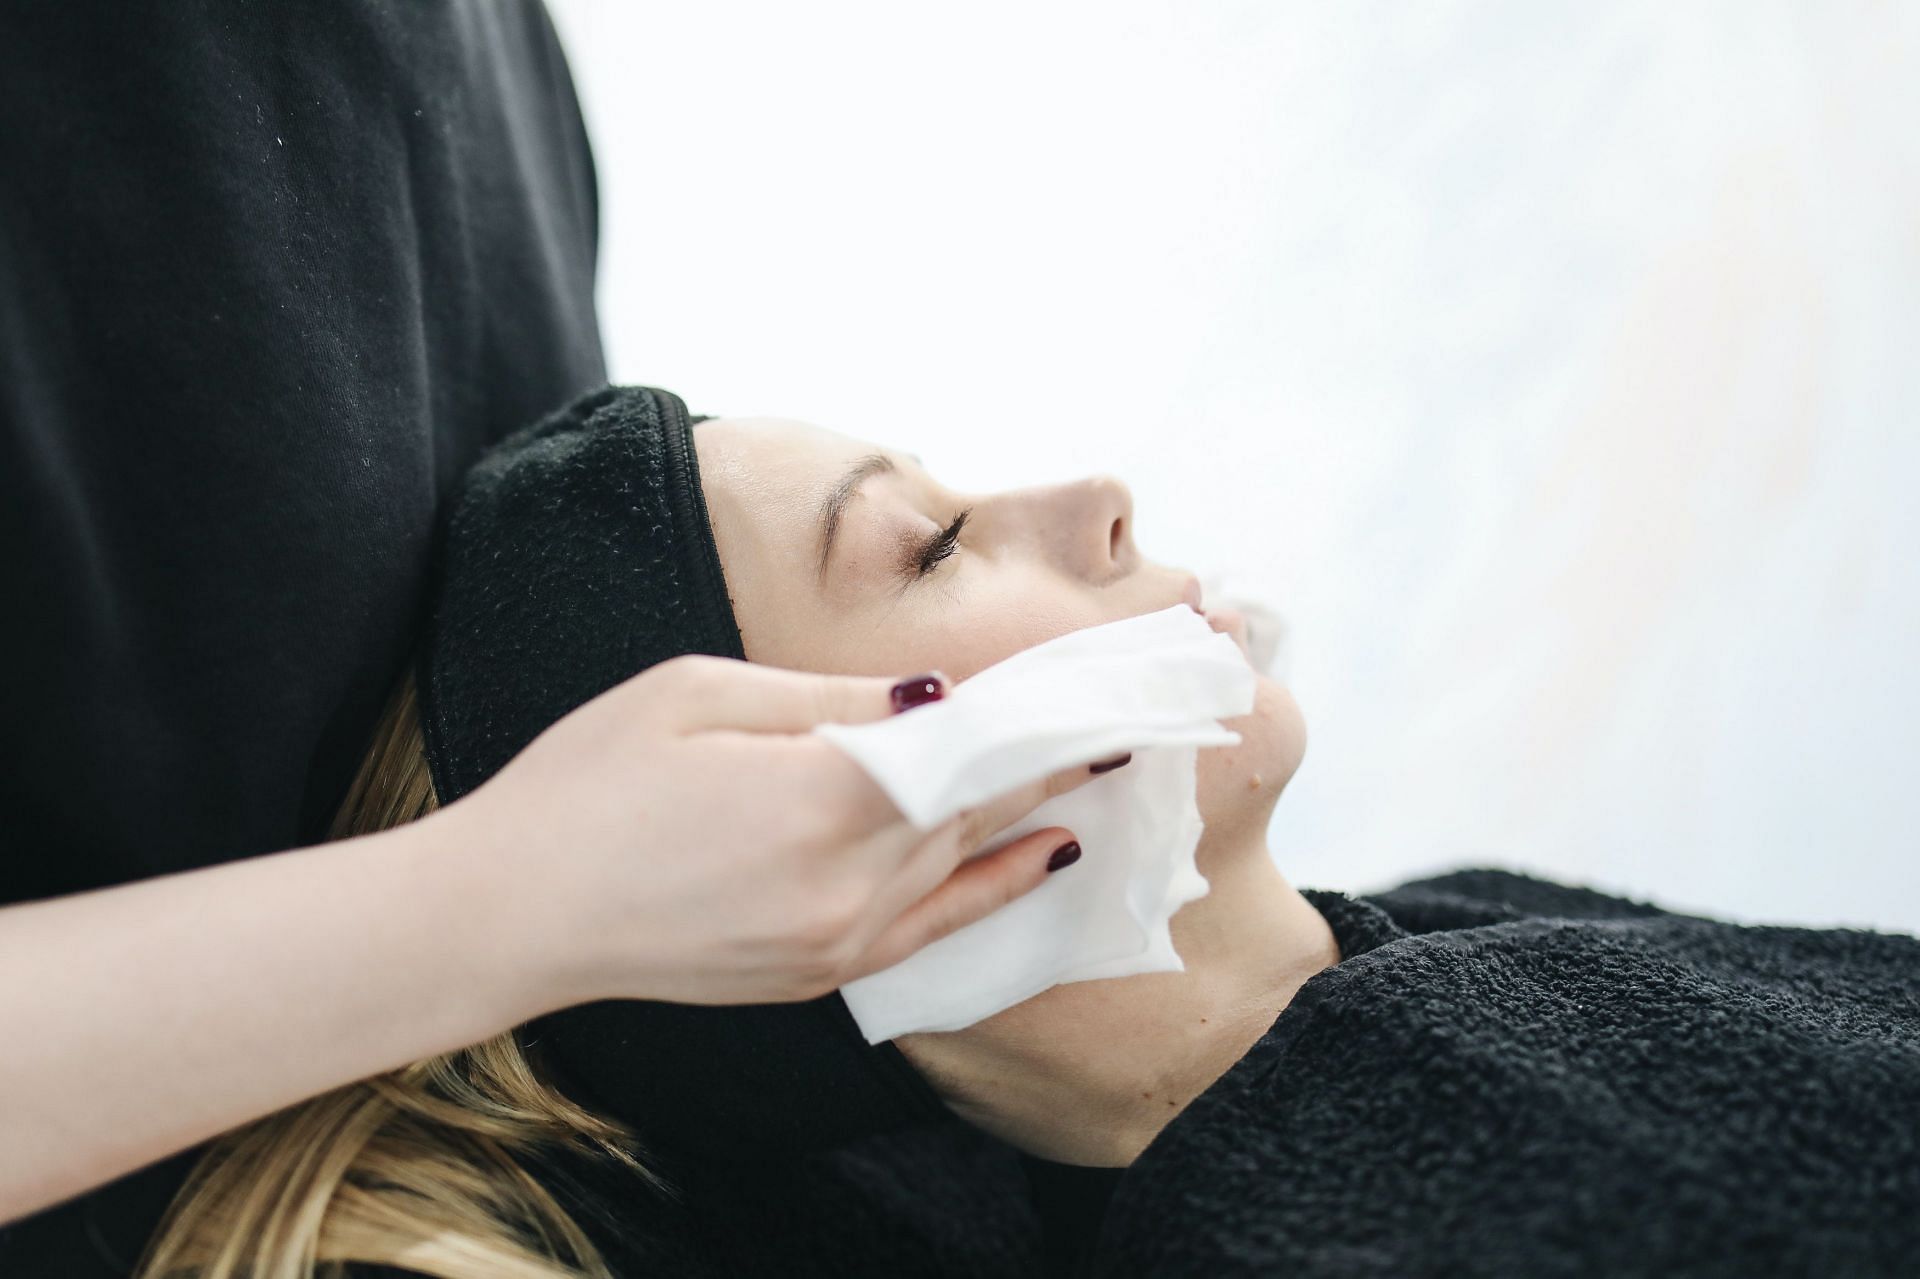 Using cleanser is essential for deep clean pores. (Image via Pexels / Polina Tankilevitch)